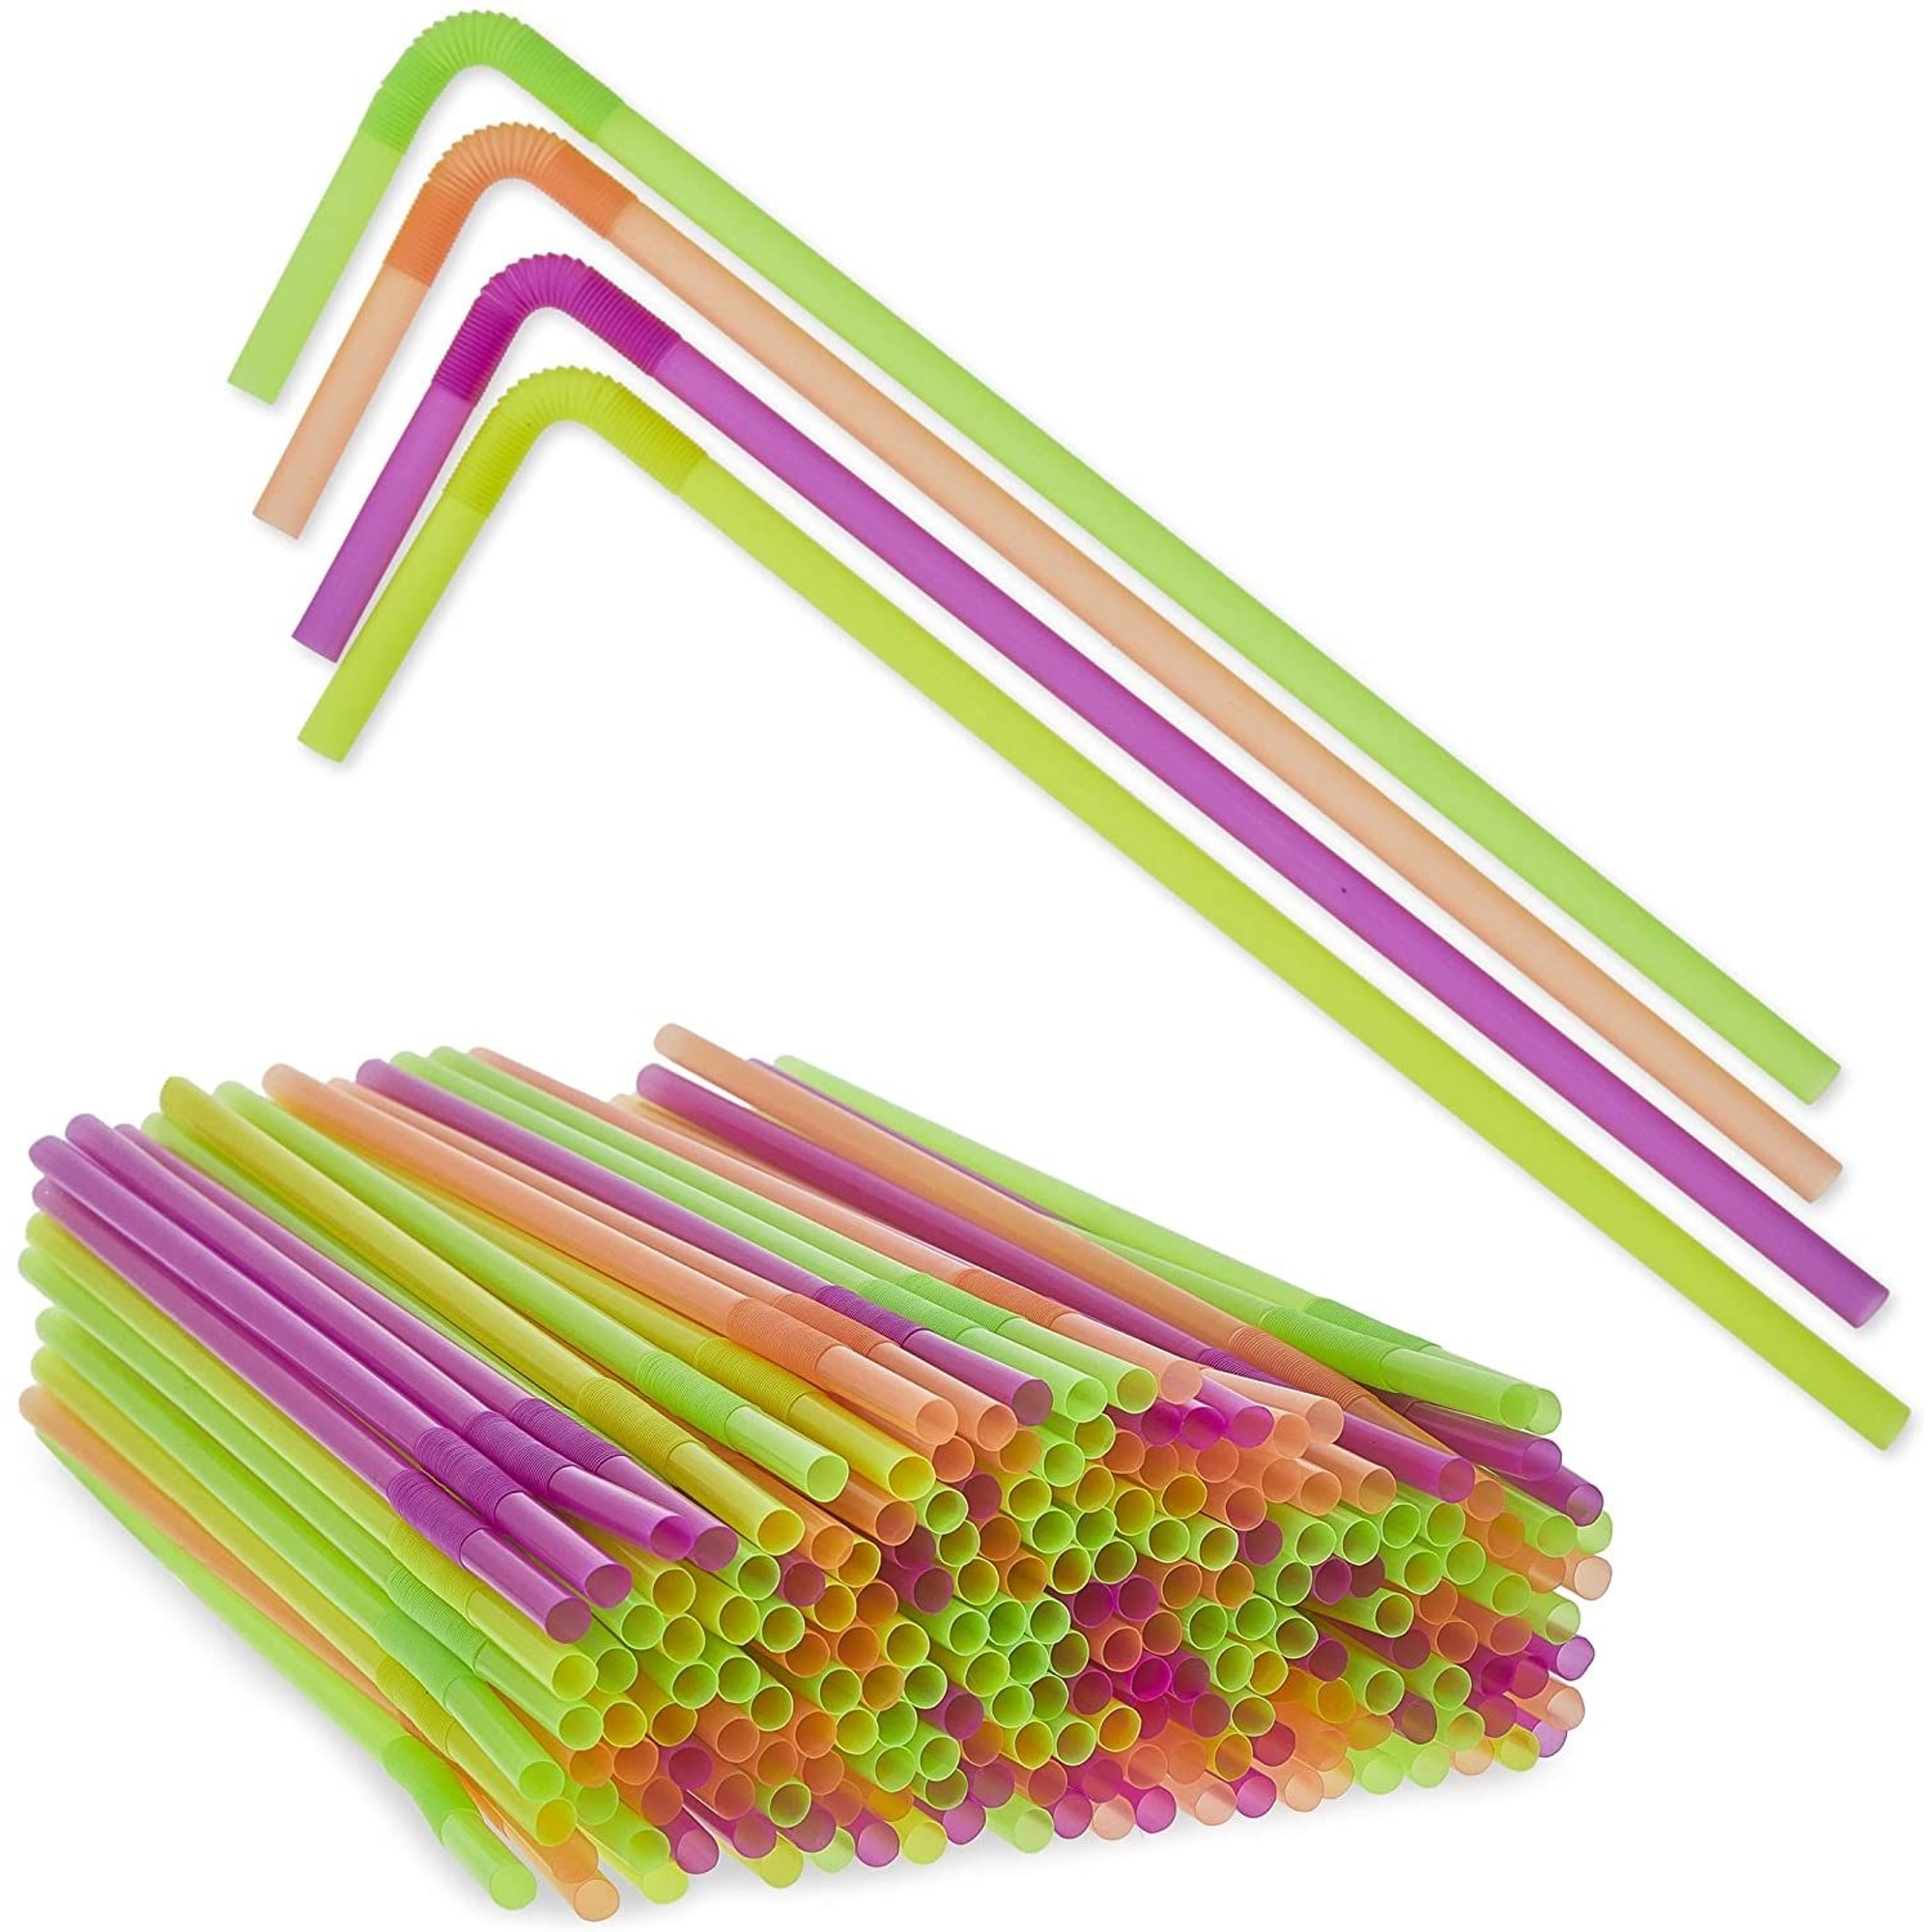 Green 11 inch long 3/8 inch diameter flexible reusable plastic straws that  fit our straw caps - Set of 20 - Free Shipping